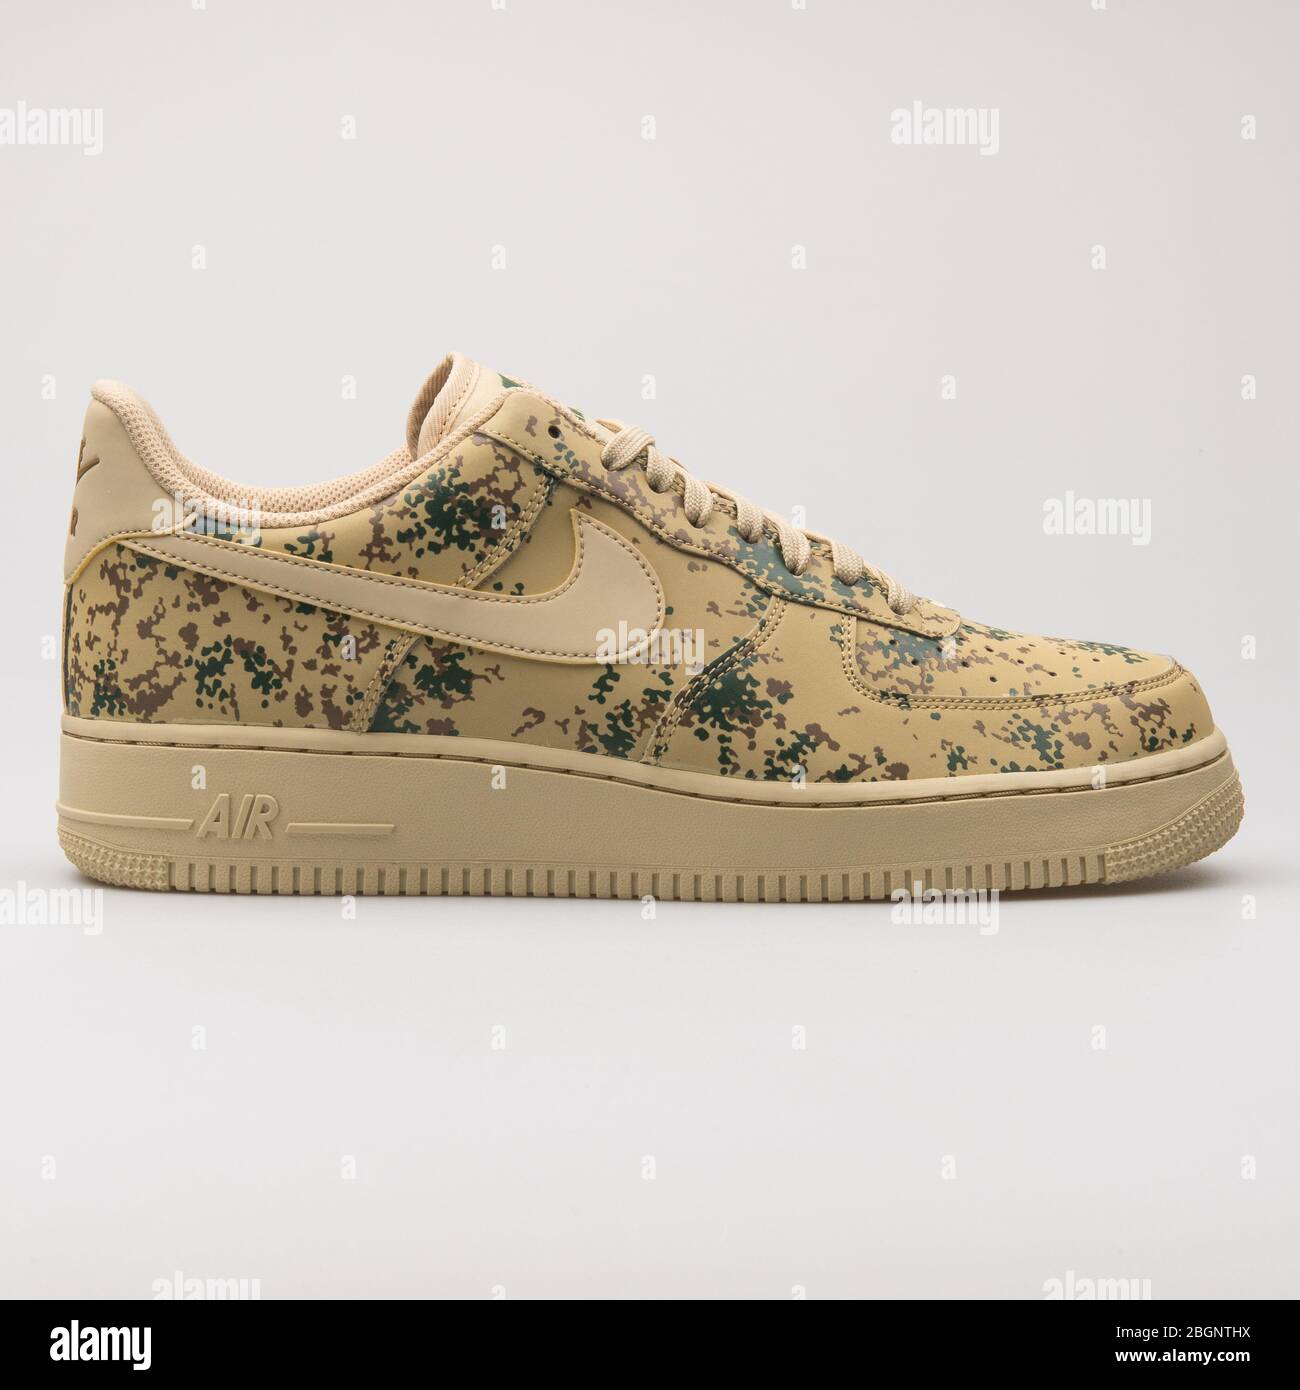 VIENNA, AUSTRIA - AUGUST 24, 2017: Nike Air Force 1 07 LV8 beige camo  sneaker on white background Stock Photo - Alamy